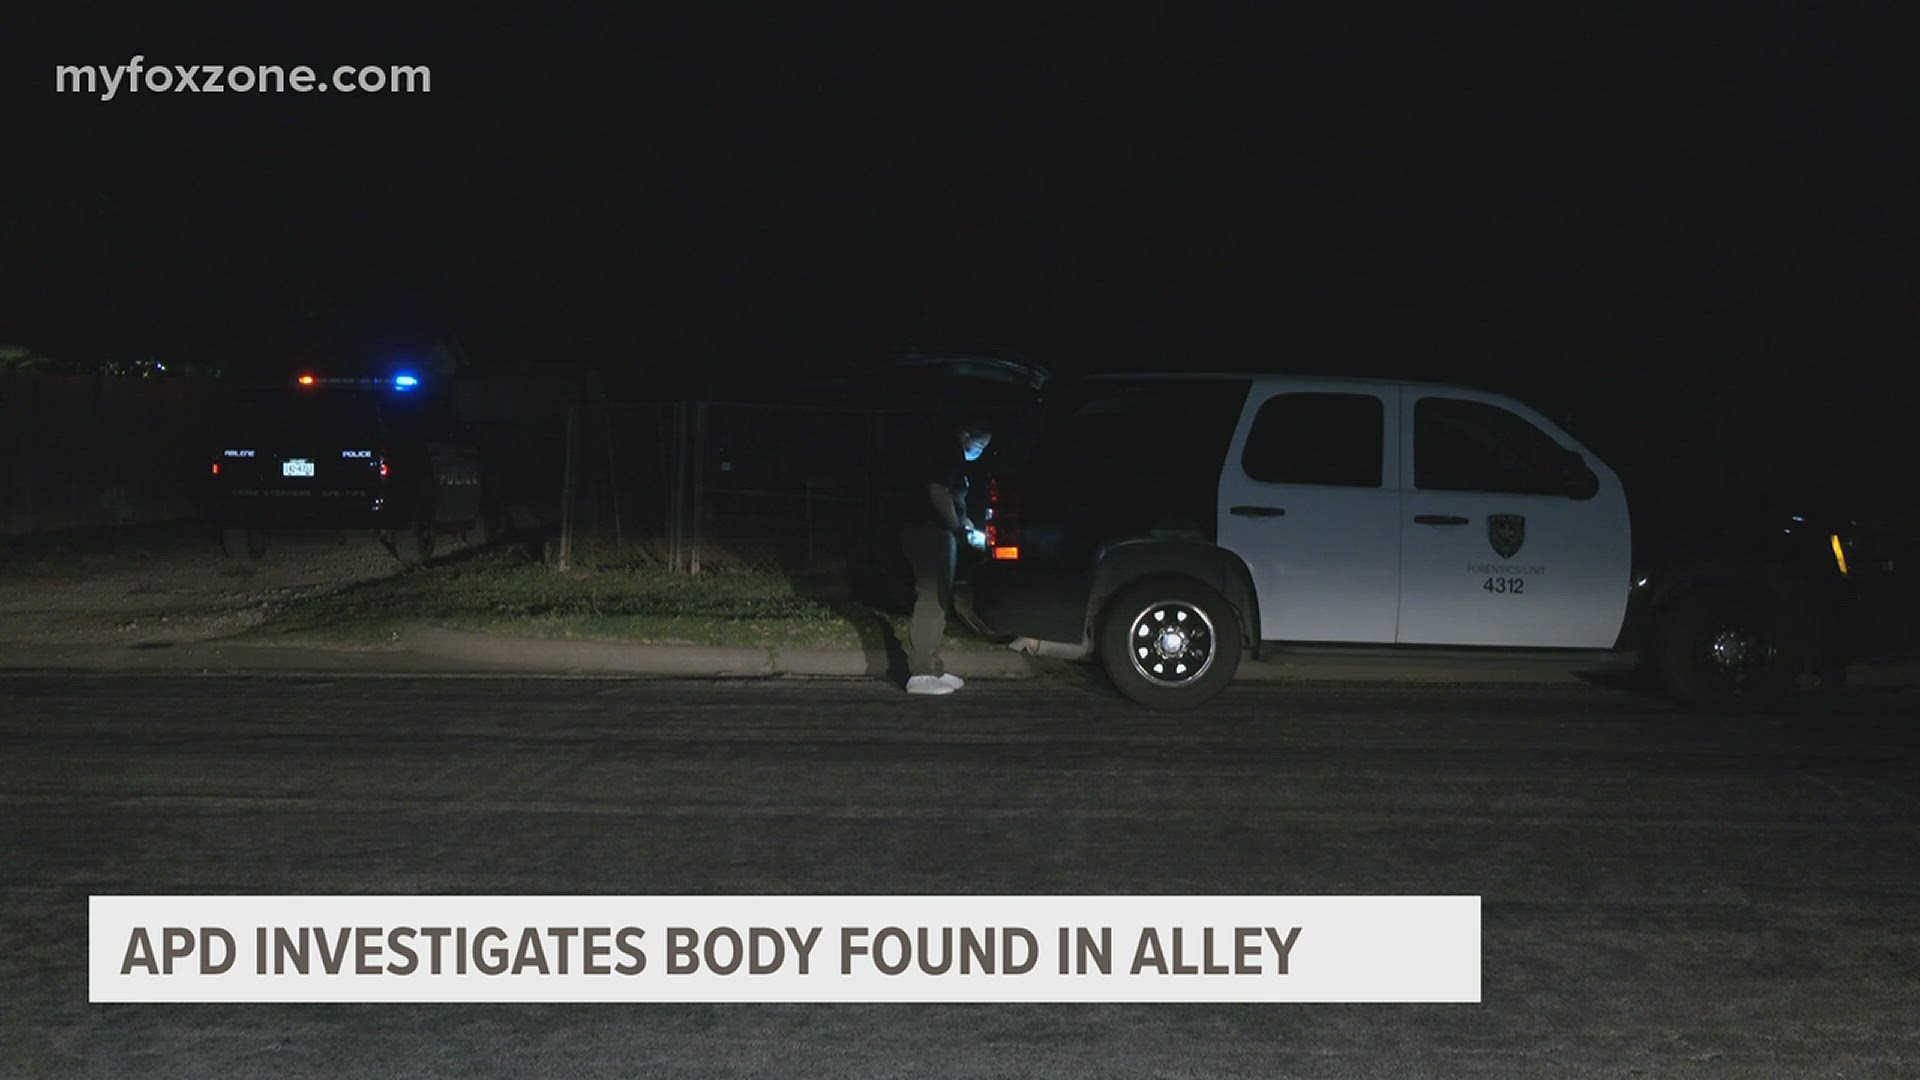 On Wednesday, Sept. 27, the Abilene Police Department received an injured subject call that led to a death investigation.